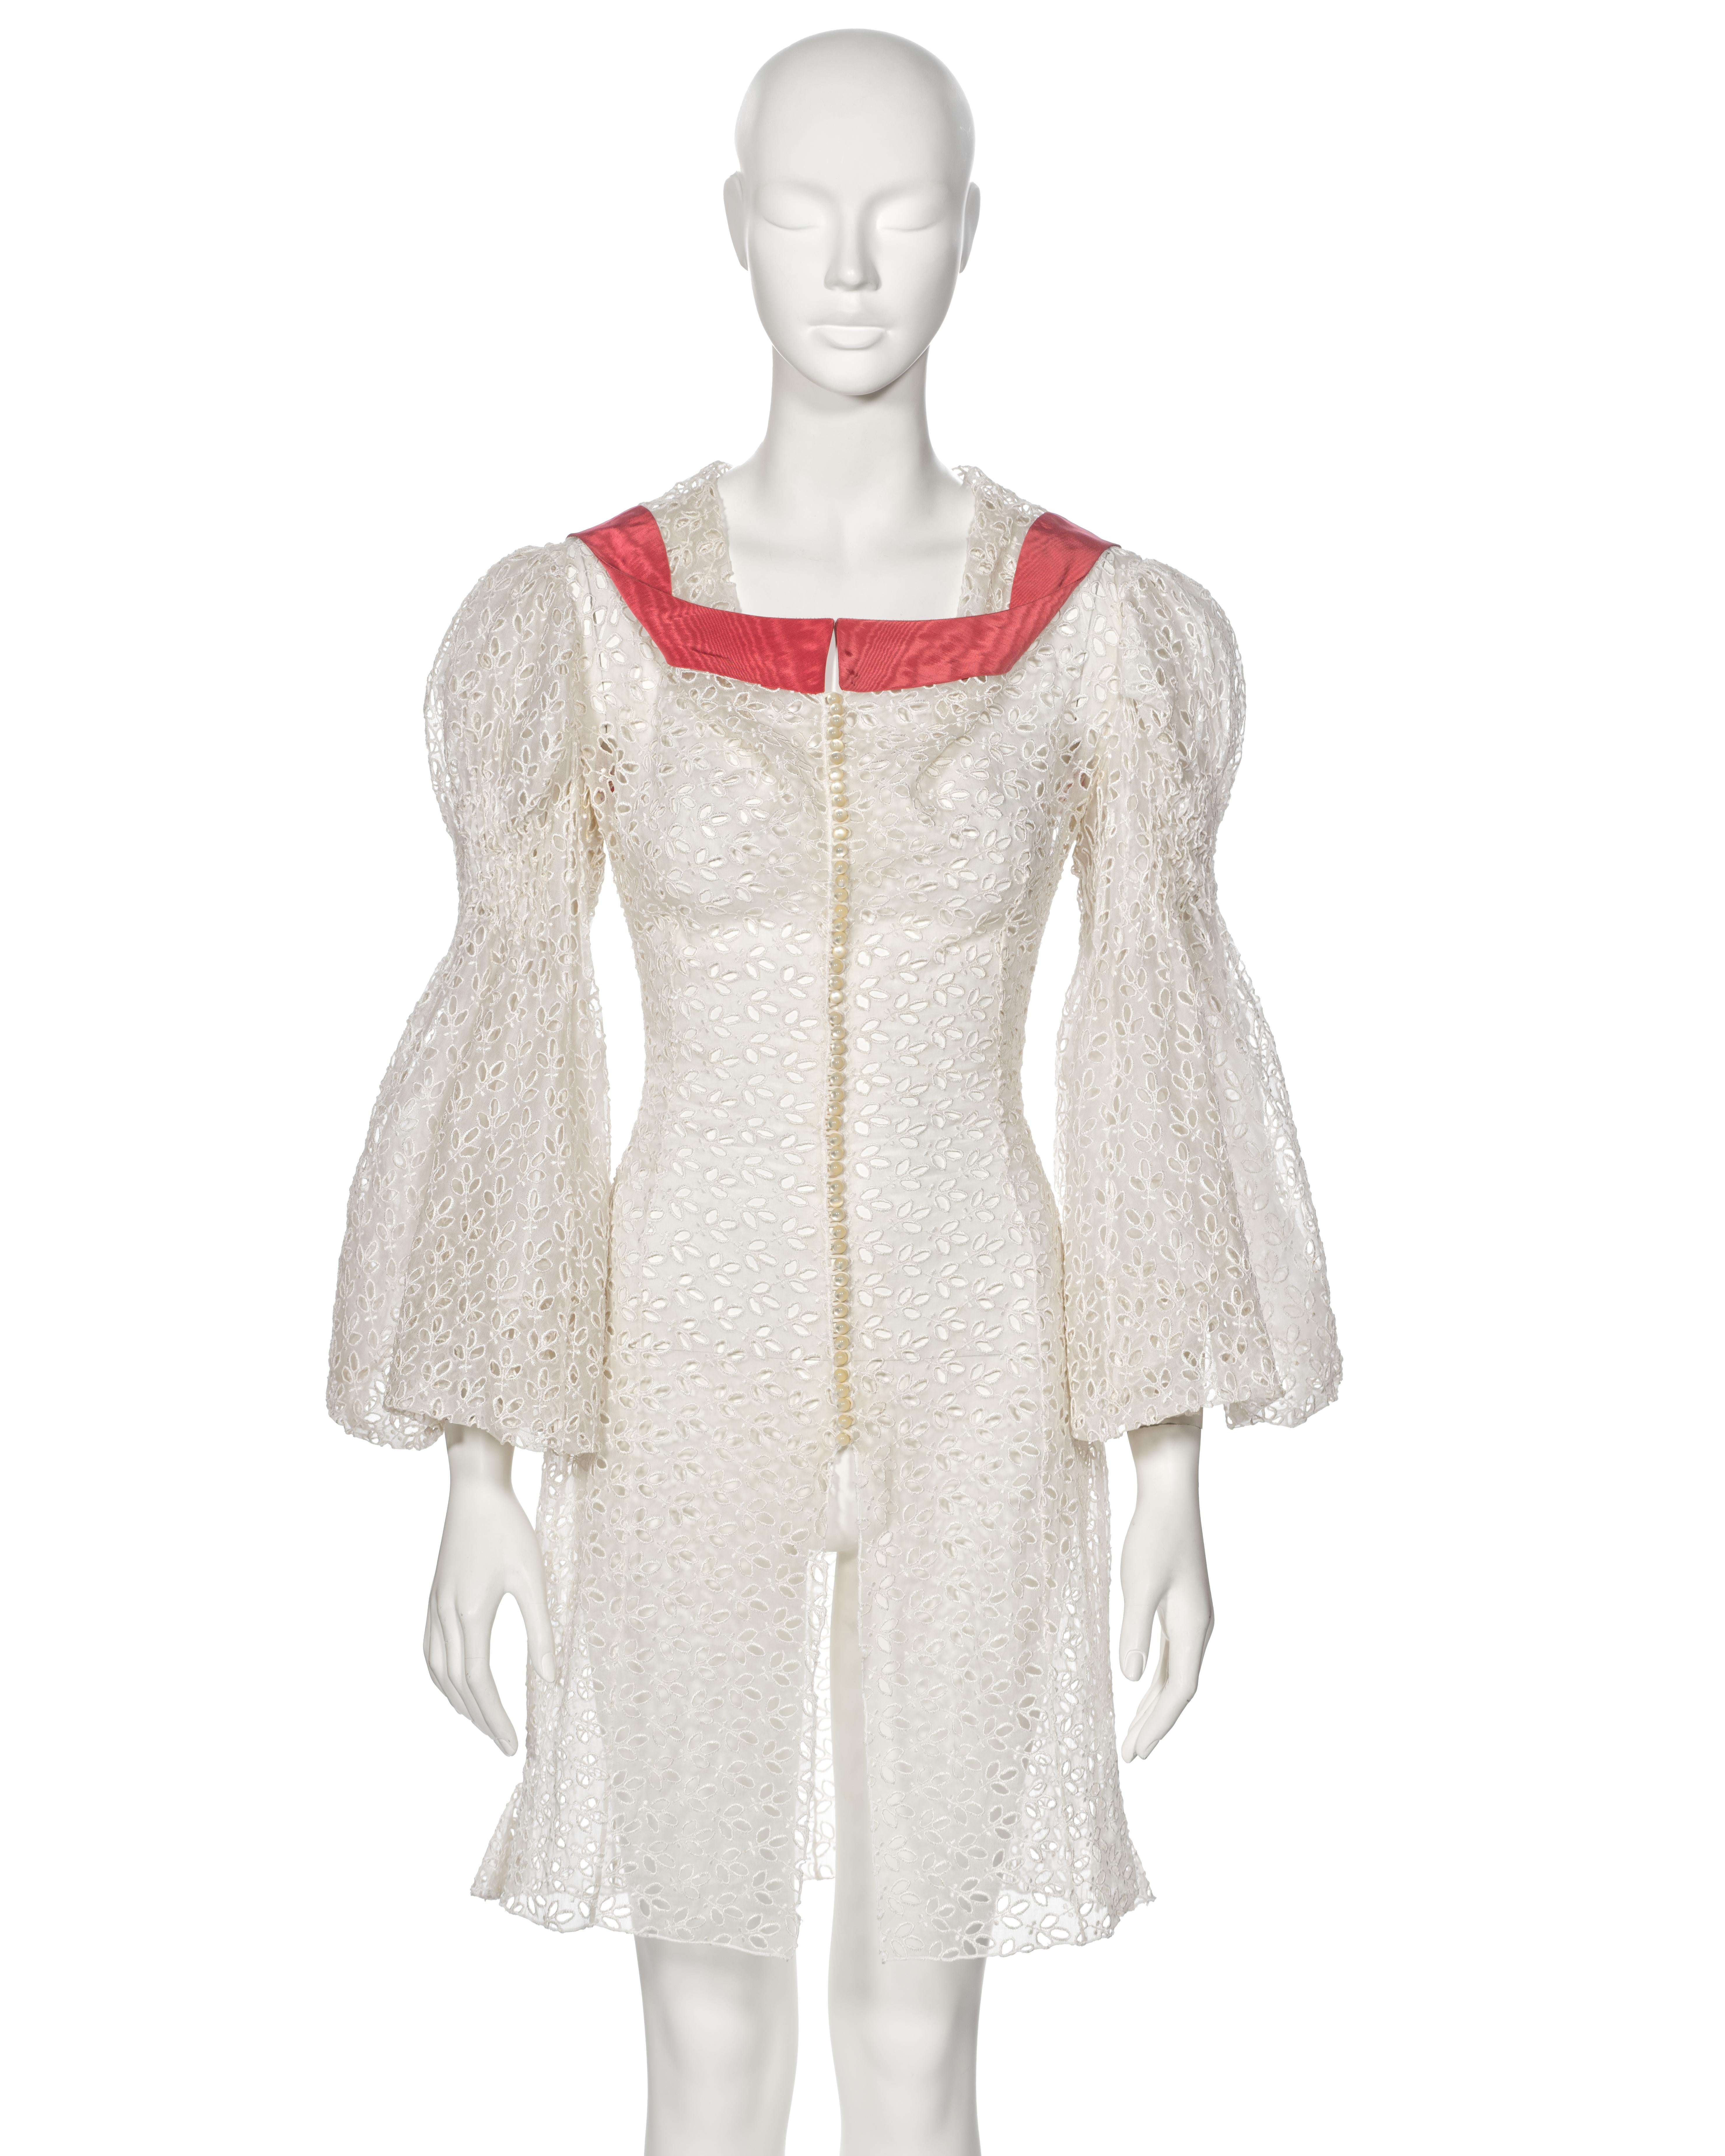 ▪ Archival John Galliano 'L'Ecole de Danse' Dress
▪ Spring-Summer 1996
▪ Museum Grade
▪ Crafted from delicate ivory cotton organza with intricate cut-work detailing
▪ Features 50 faux-pearl buttons along the front opening
▪ Sailor-collar edged in